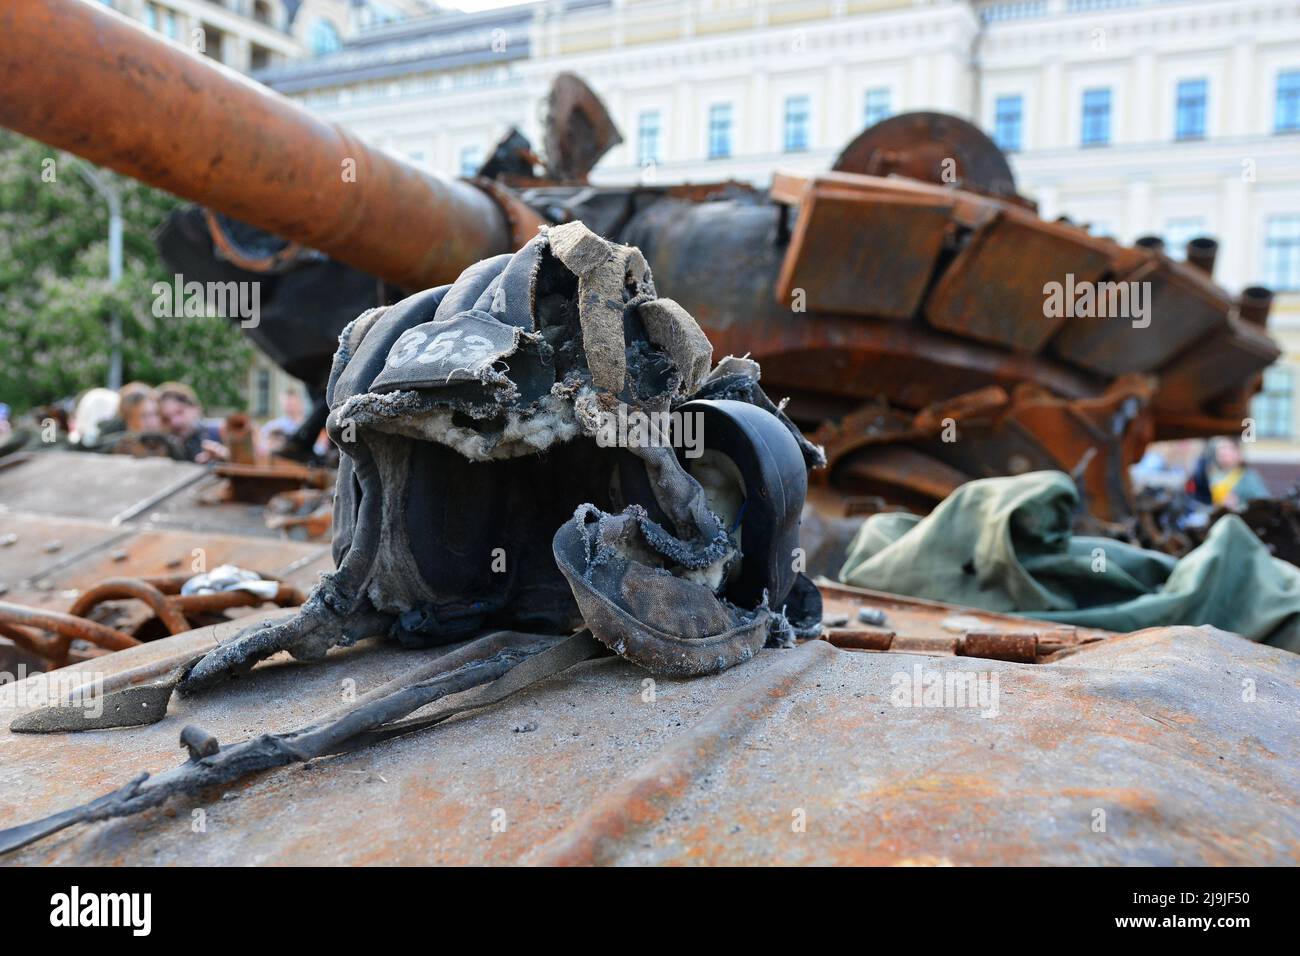 Kyiv, Ukraine. 23rd May, 2022. A view of a Russian tank exhibited at Mykhailivska Square. Russia invaded Ukraine on 24 February 2022, triggering the largest military attack in Europe since World War II. (Photo by Aleksandr Gusev/SOPA Images/Sipa USA) Credit: Sipa USA/Alamy Live News Stock Photo